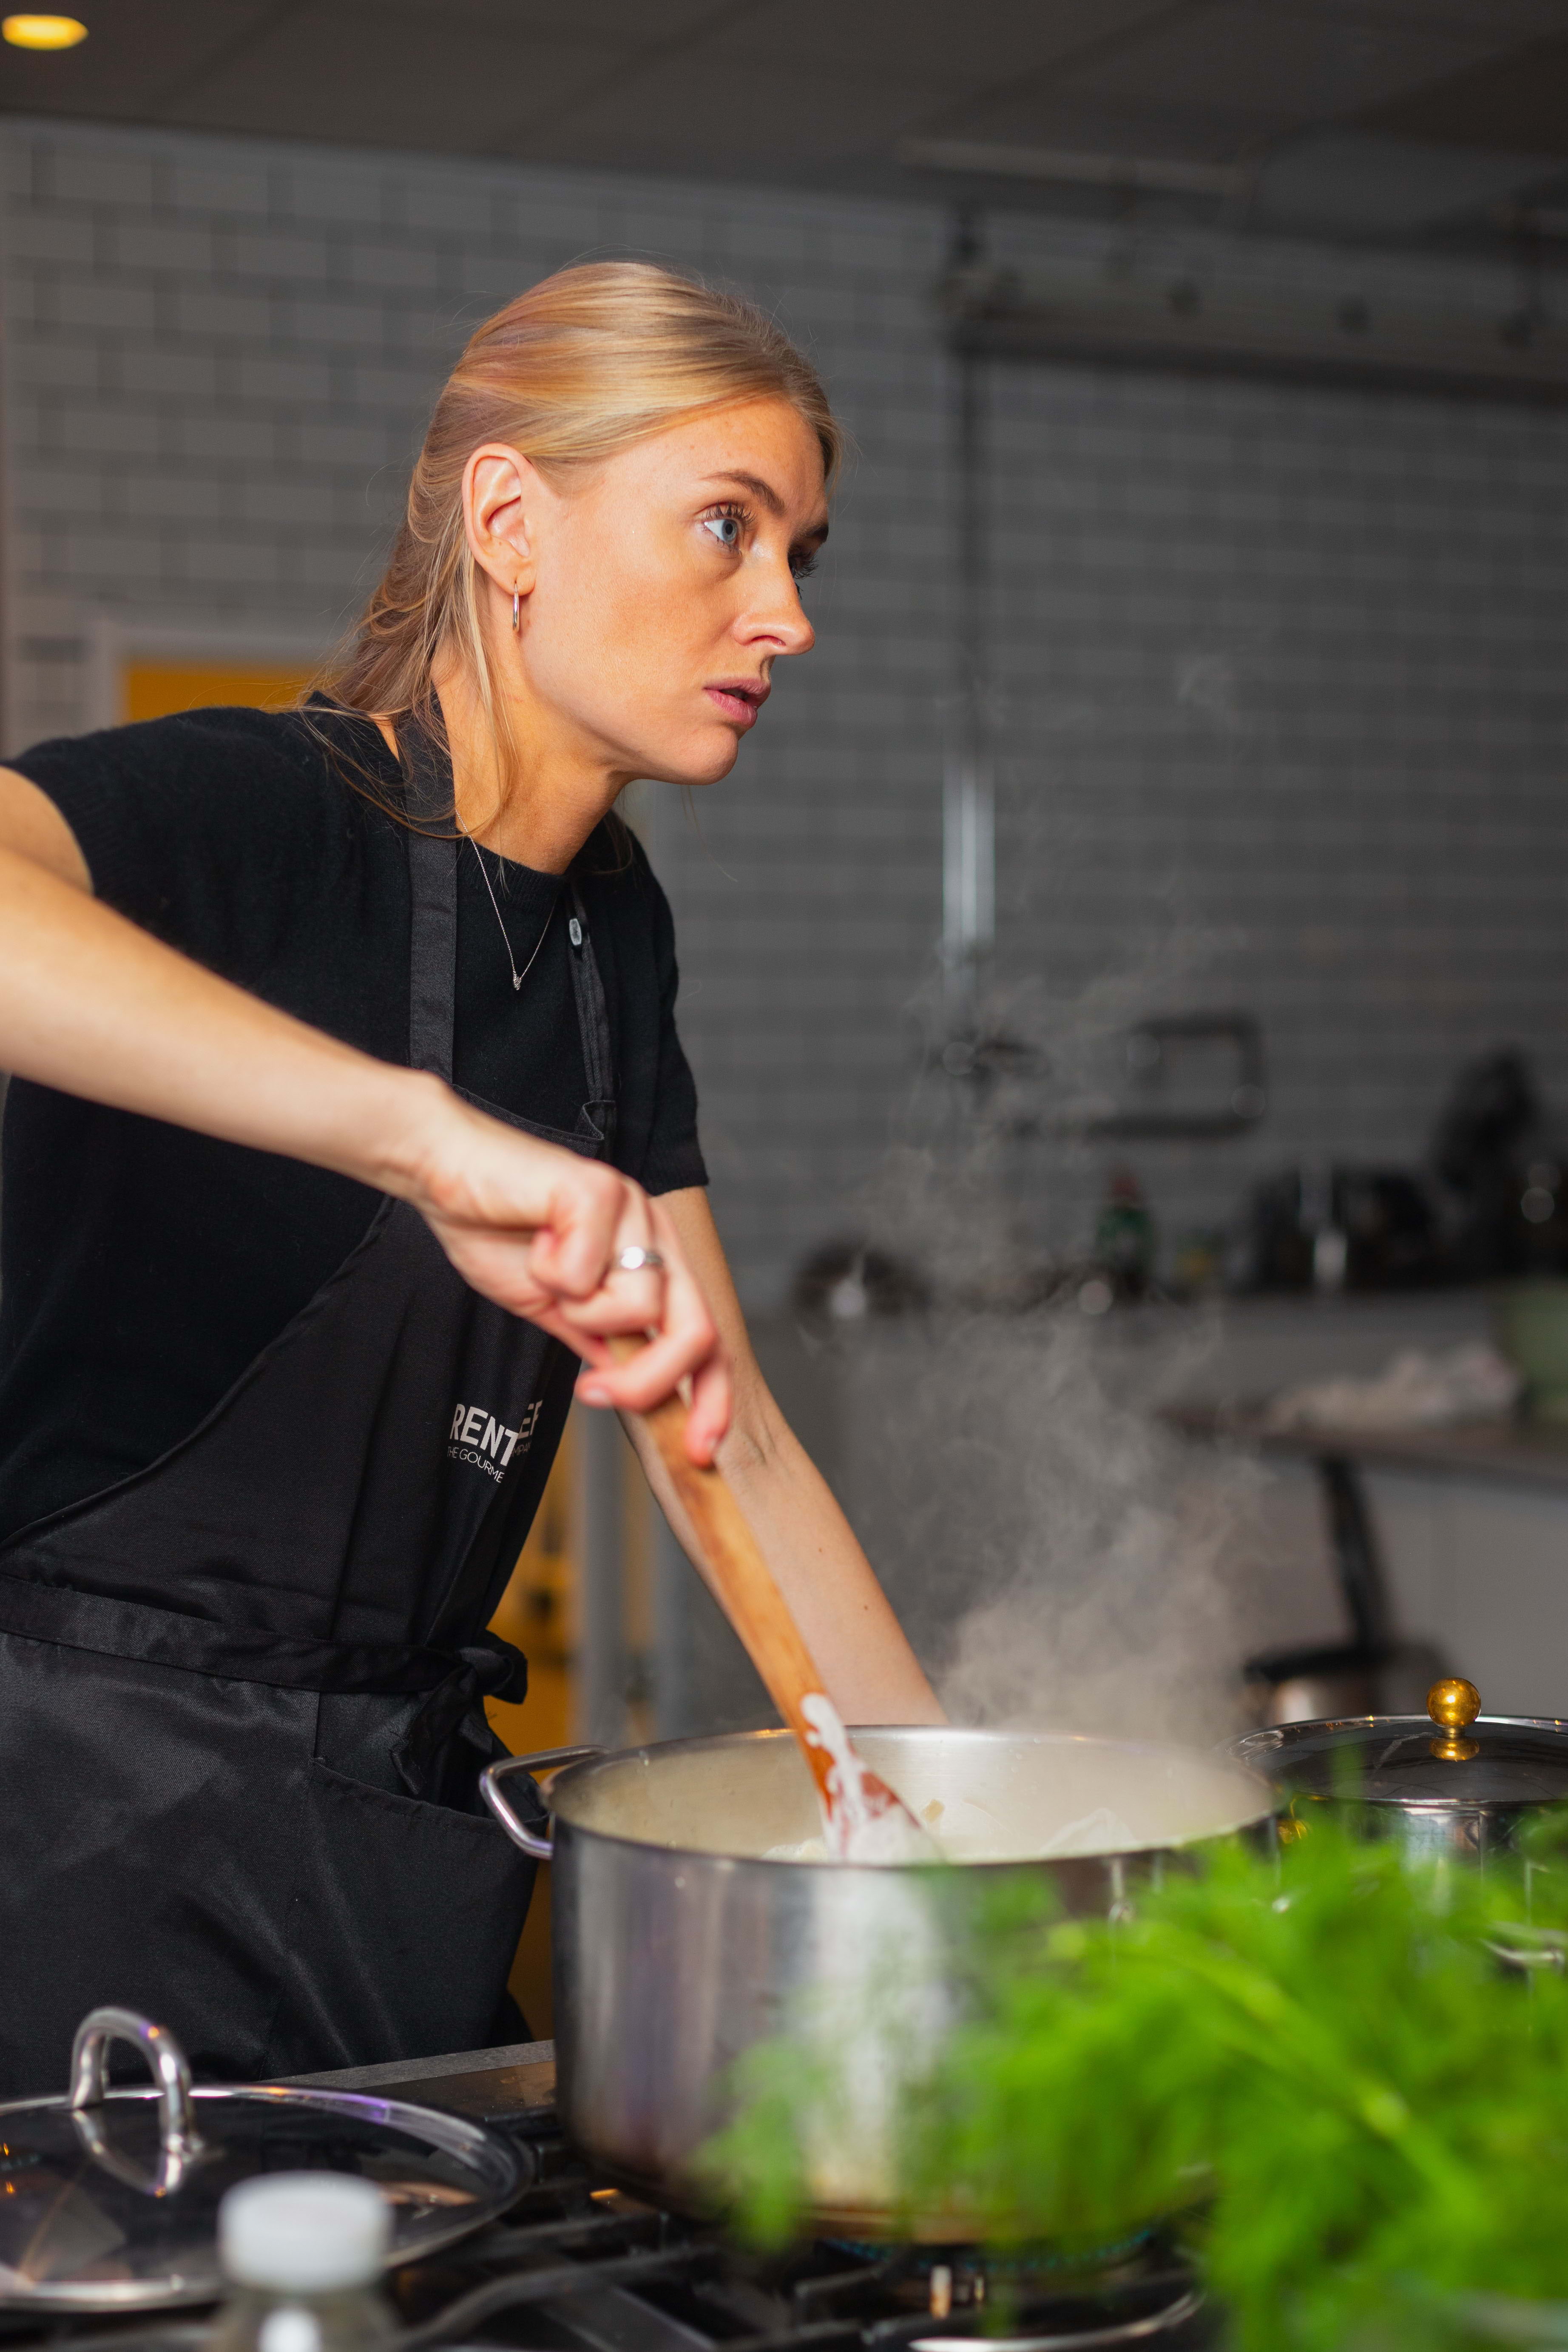 Thatsup Event: Cookalong på Rent a Chef